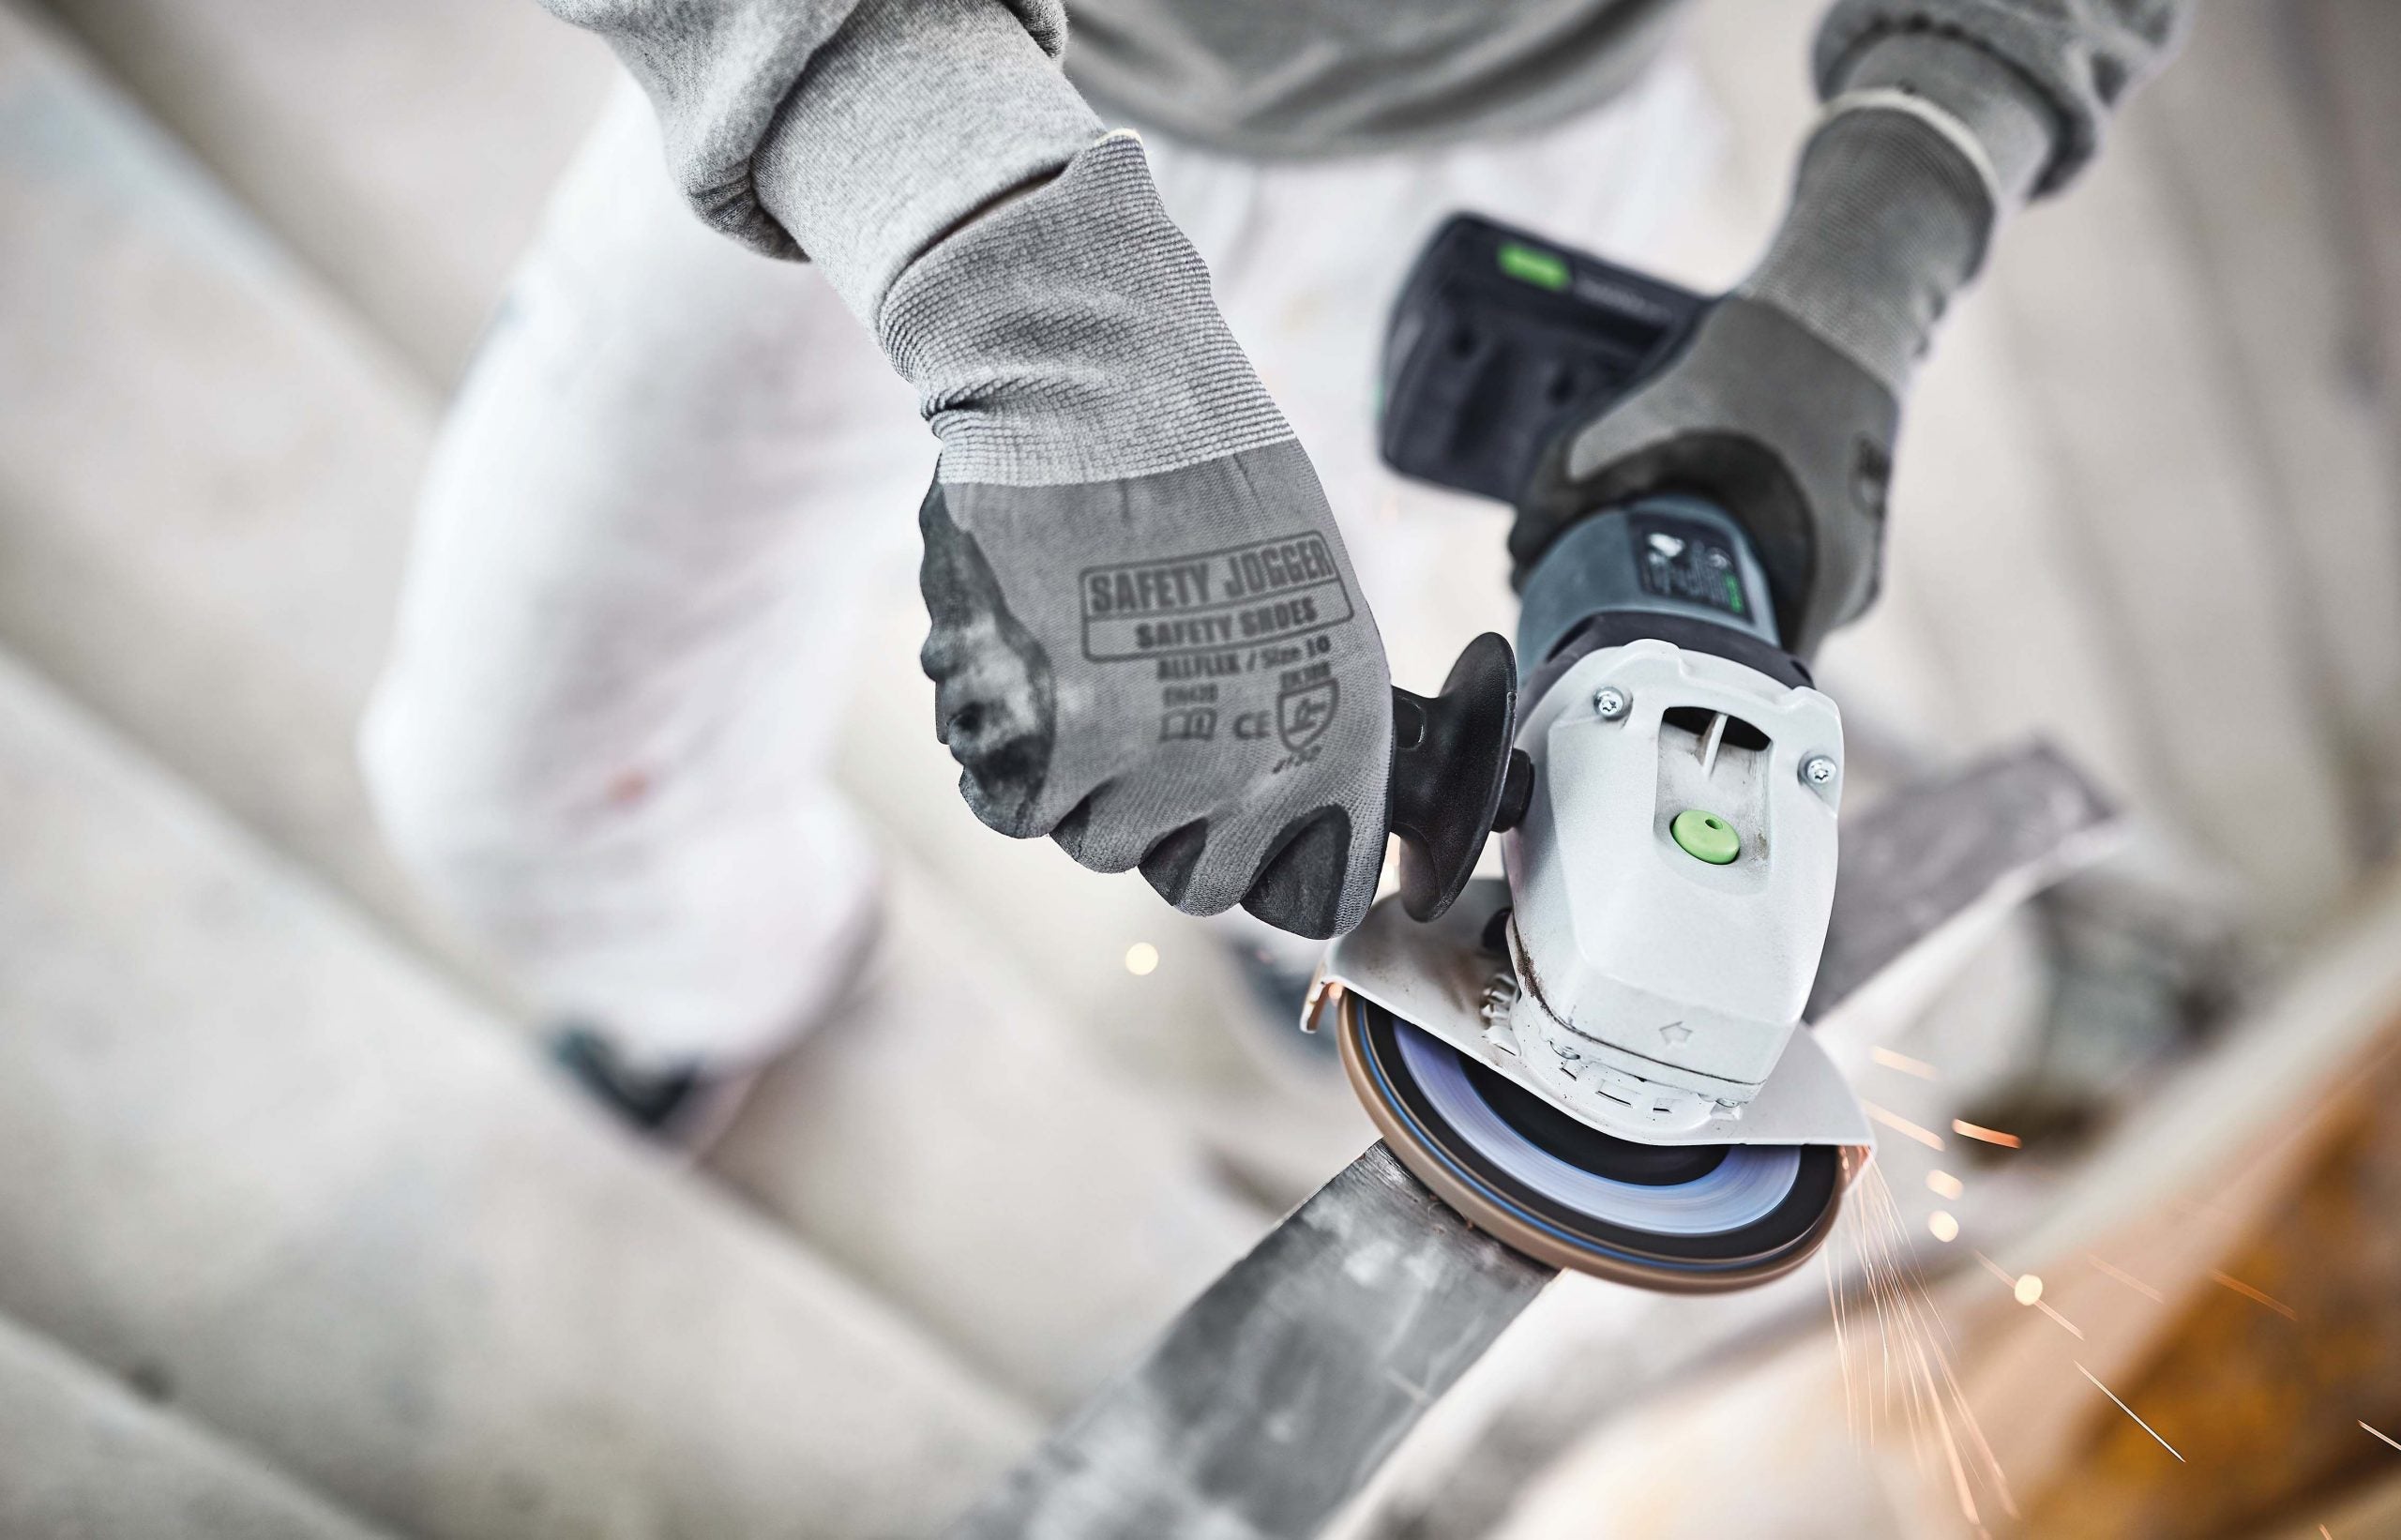 125mm Cordless Angle Grinder 5.2Ah Set in Systainer AGC 18-125 Li 5.2Ah TCL6-Plus 577031 by Festool